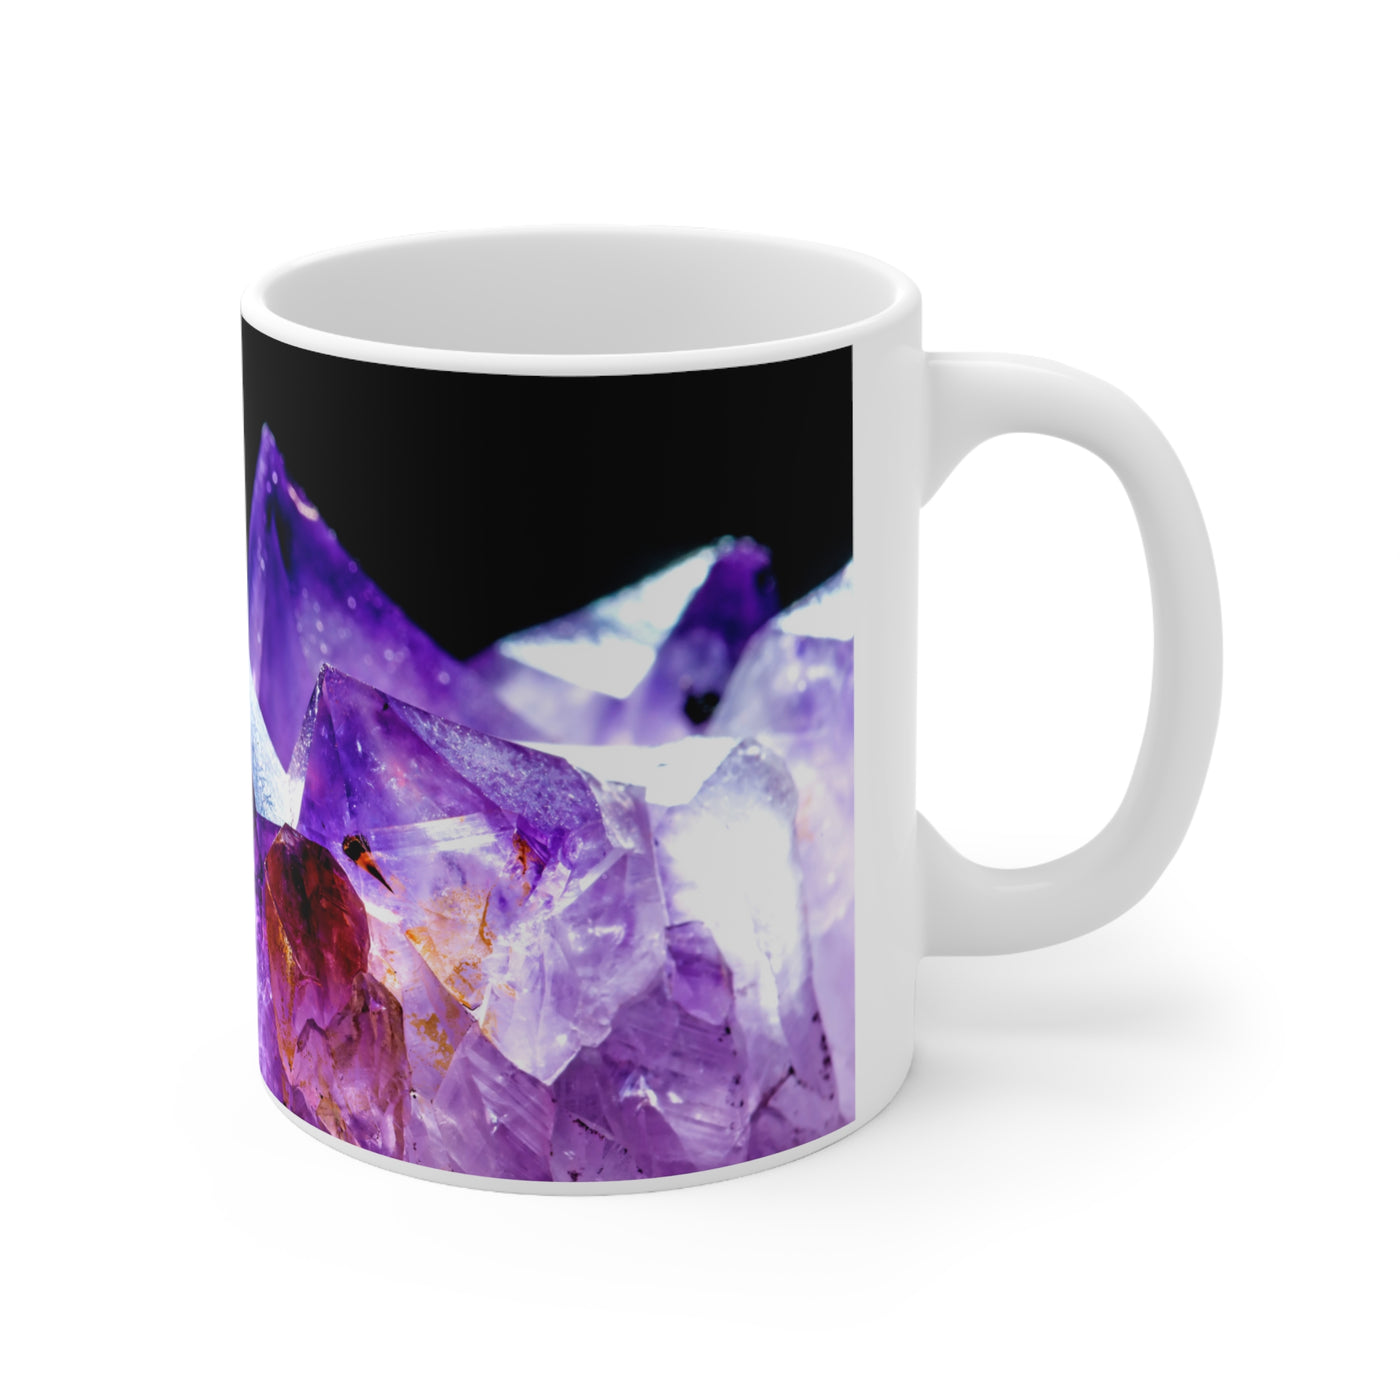 Boho Amethyst Stone Ceramic Mug - Crystals - Gemstones - Southwest Style Tea Cup, Perfect Gift for Crystal Lovers and Rockhounds 11 oz